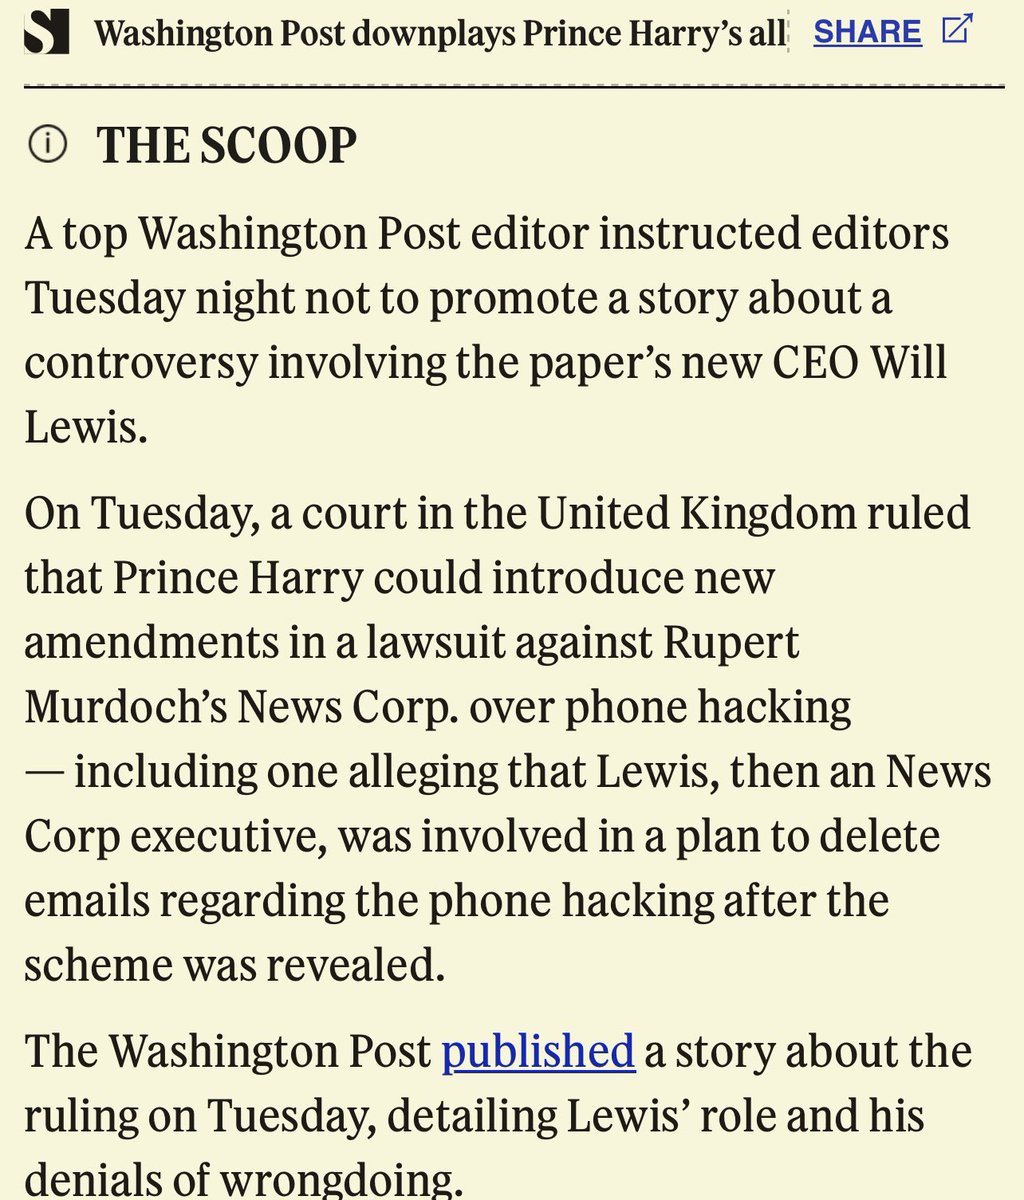 W/Post biggest mistake was hiring a criminal in the first place so of course they will do everything in their power to censor the developments of Prince Harry’s case against the BP They’re criminals H is the only one with guts to stand up to them